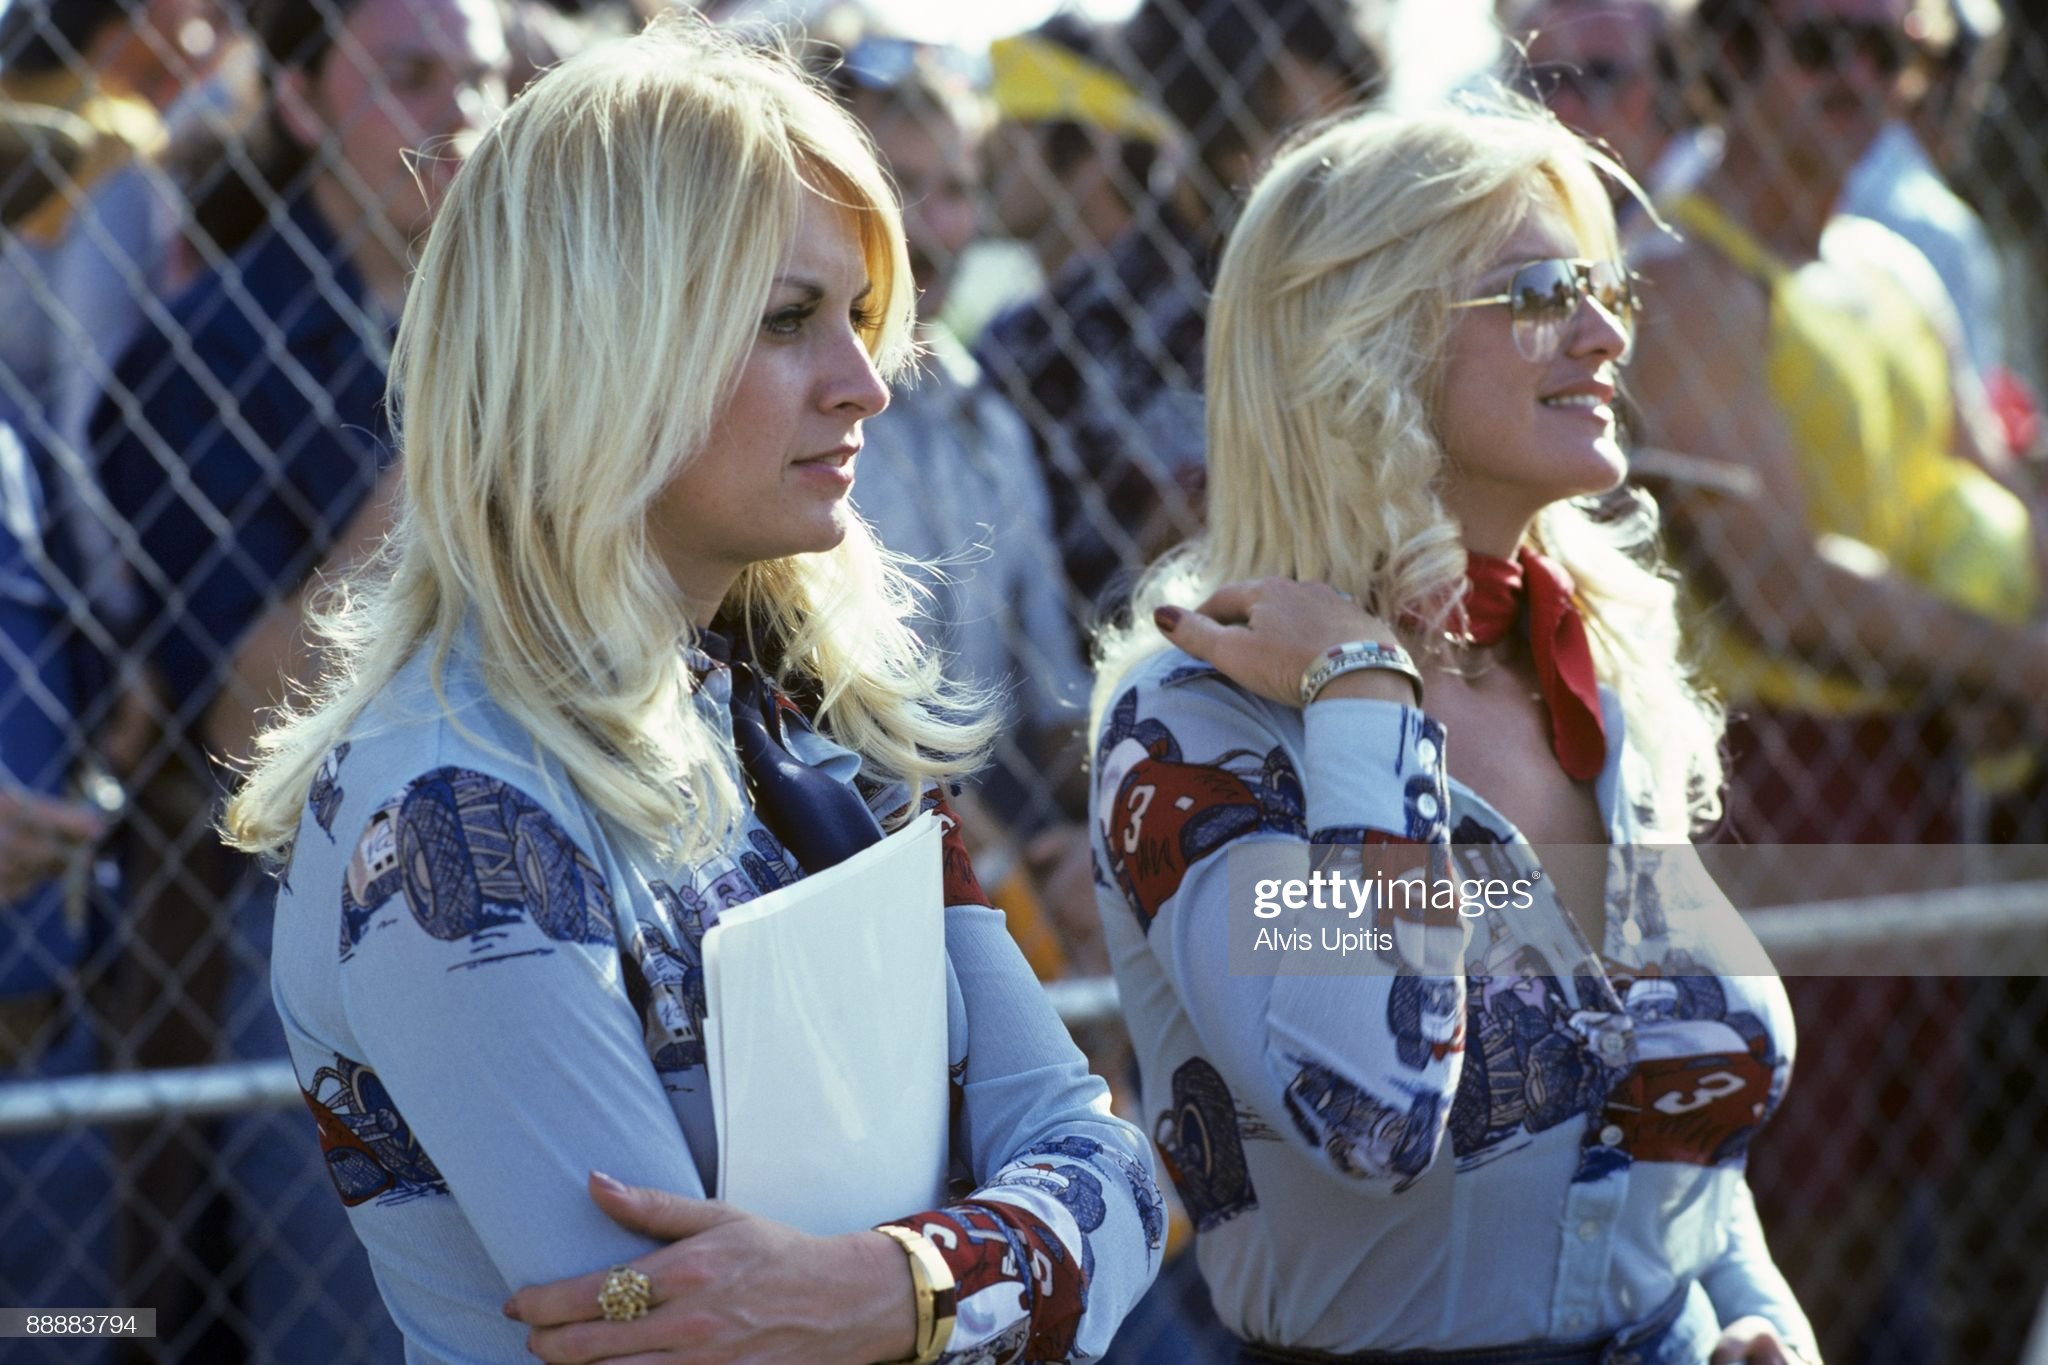 Linda Vaughn (right) at the inaugural United States Grand Prix West on March 28, 1976 in Long Beach, California.